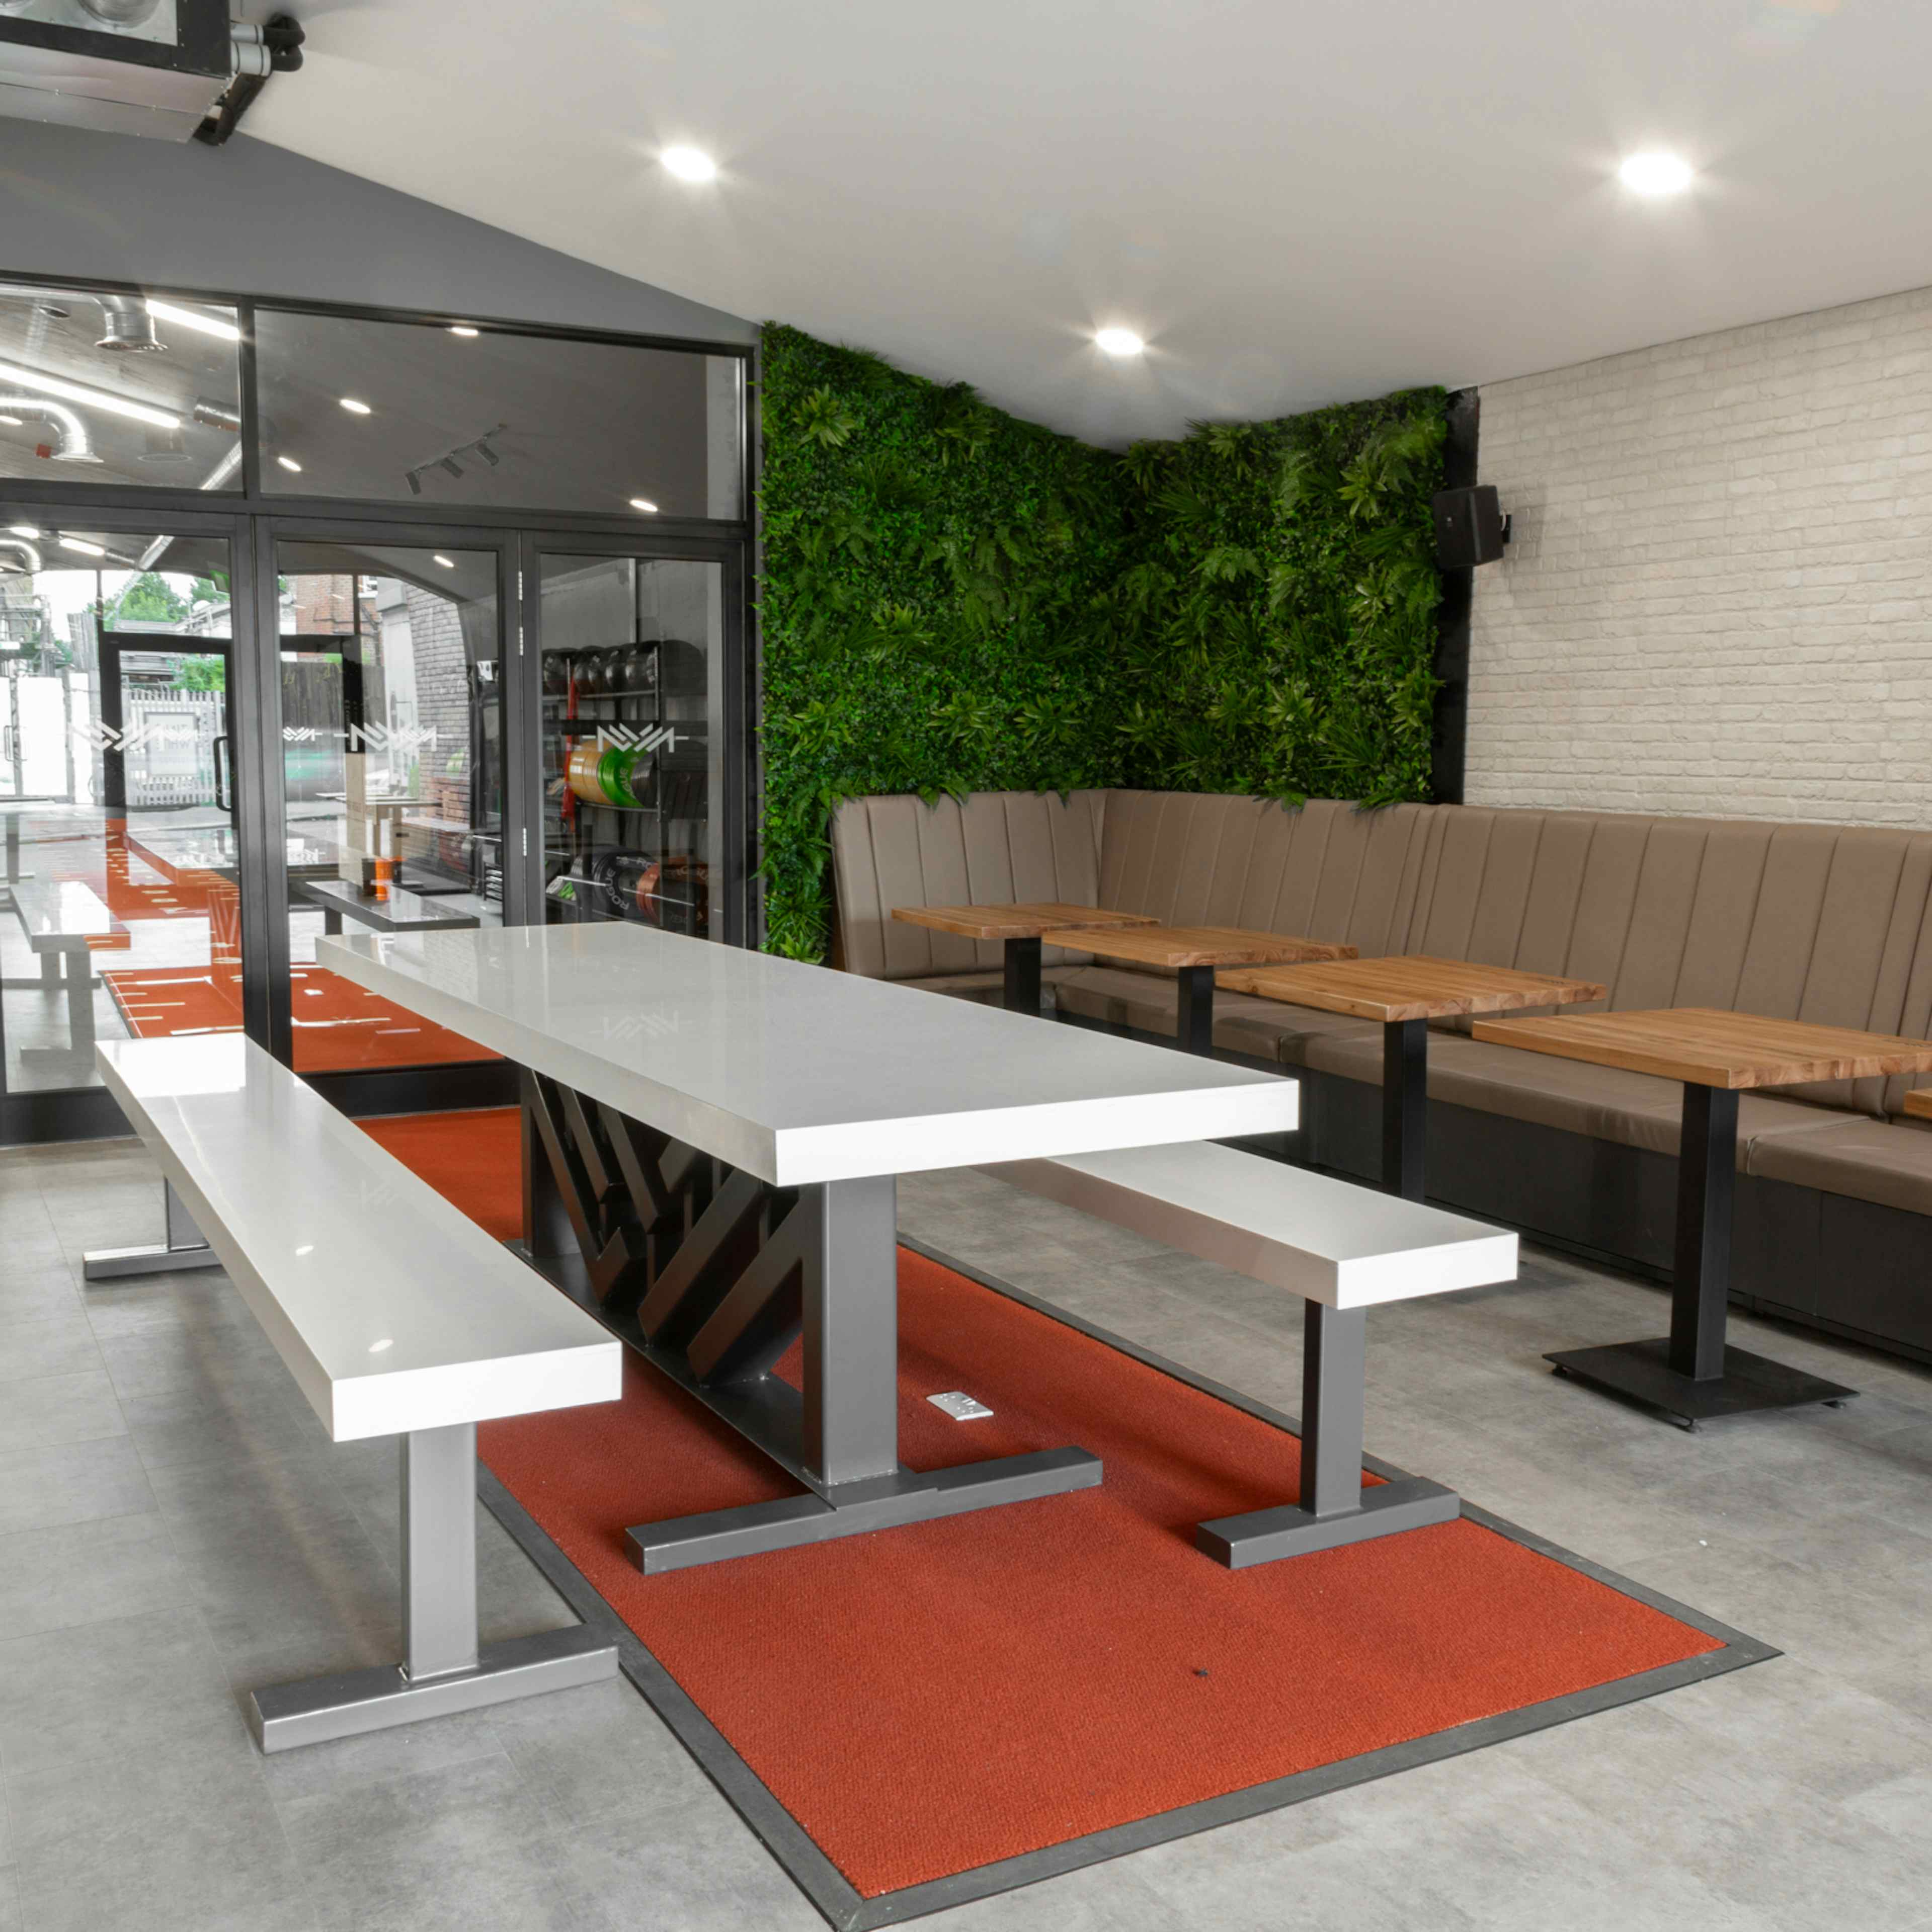 CrossFit Putney - Cafe and Outdoor Space  image 3